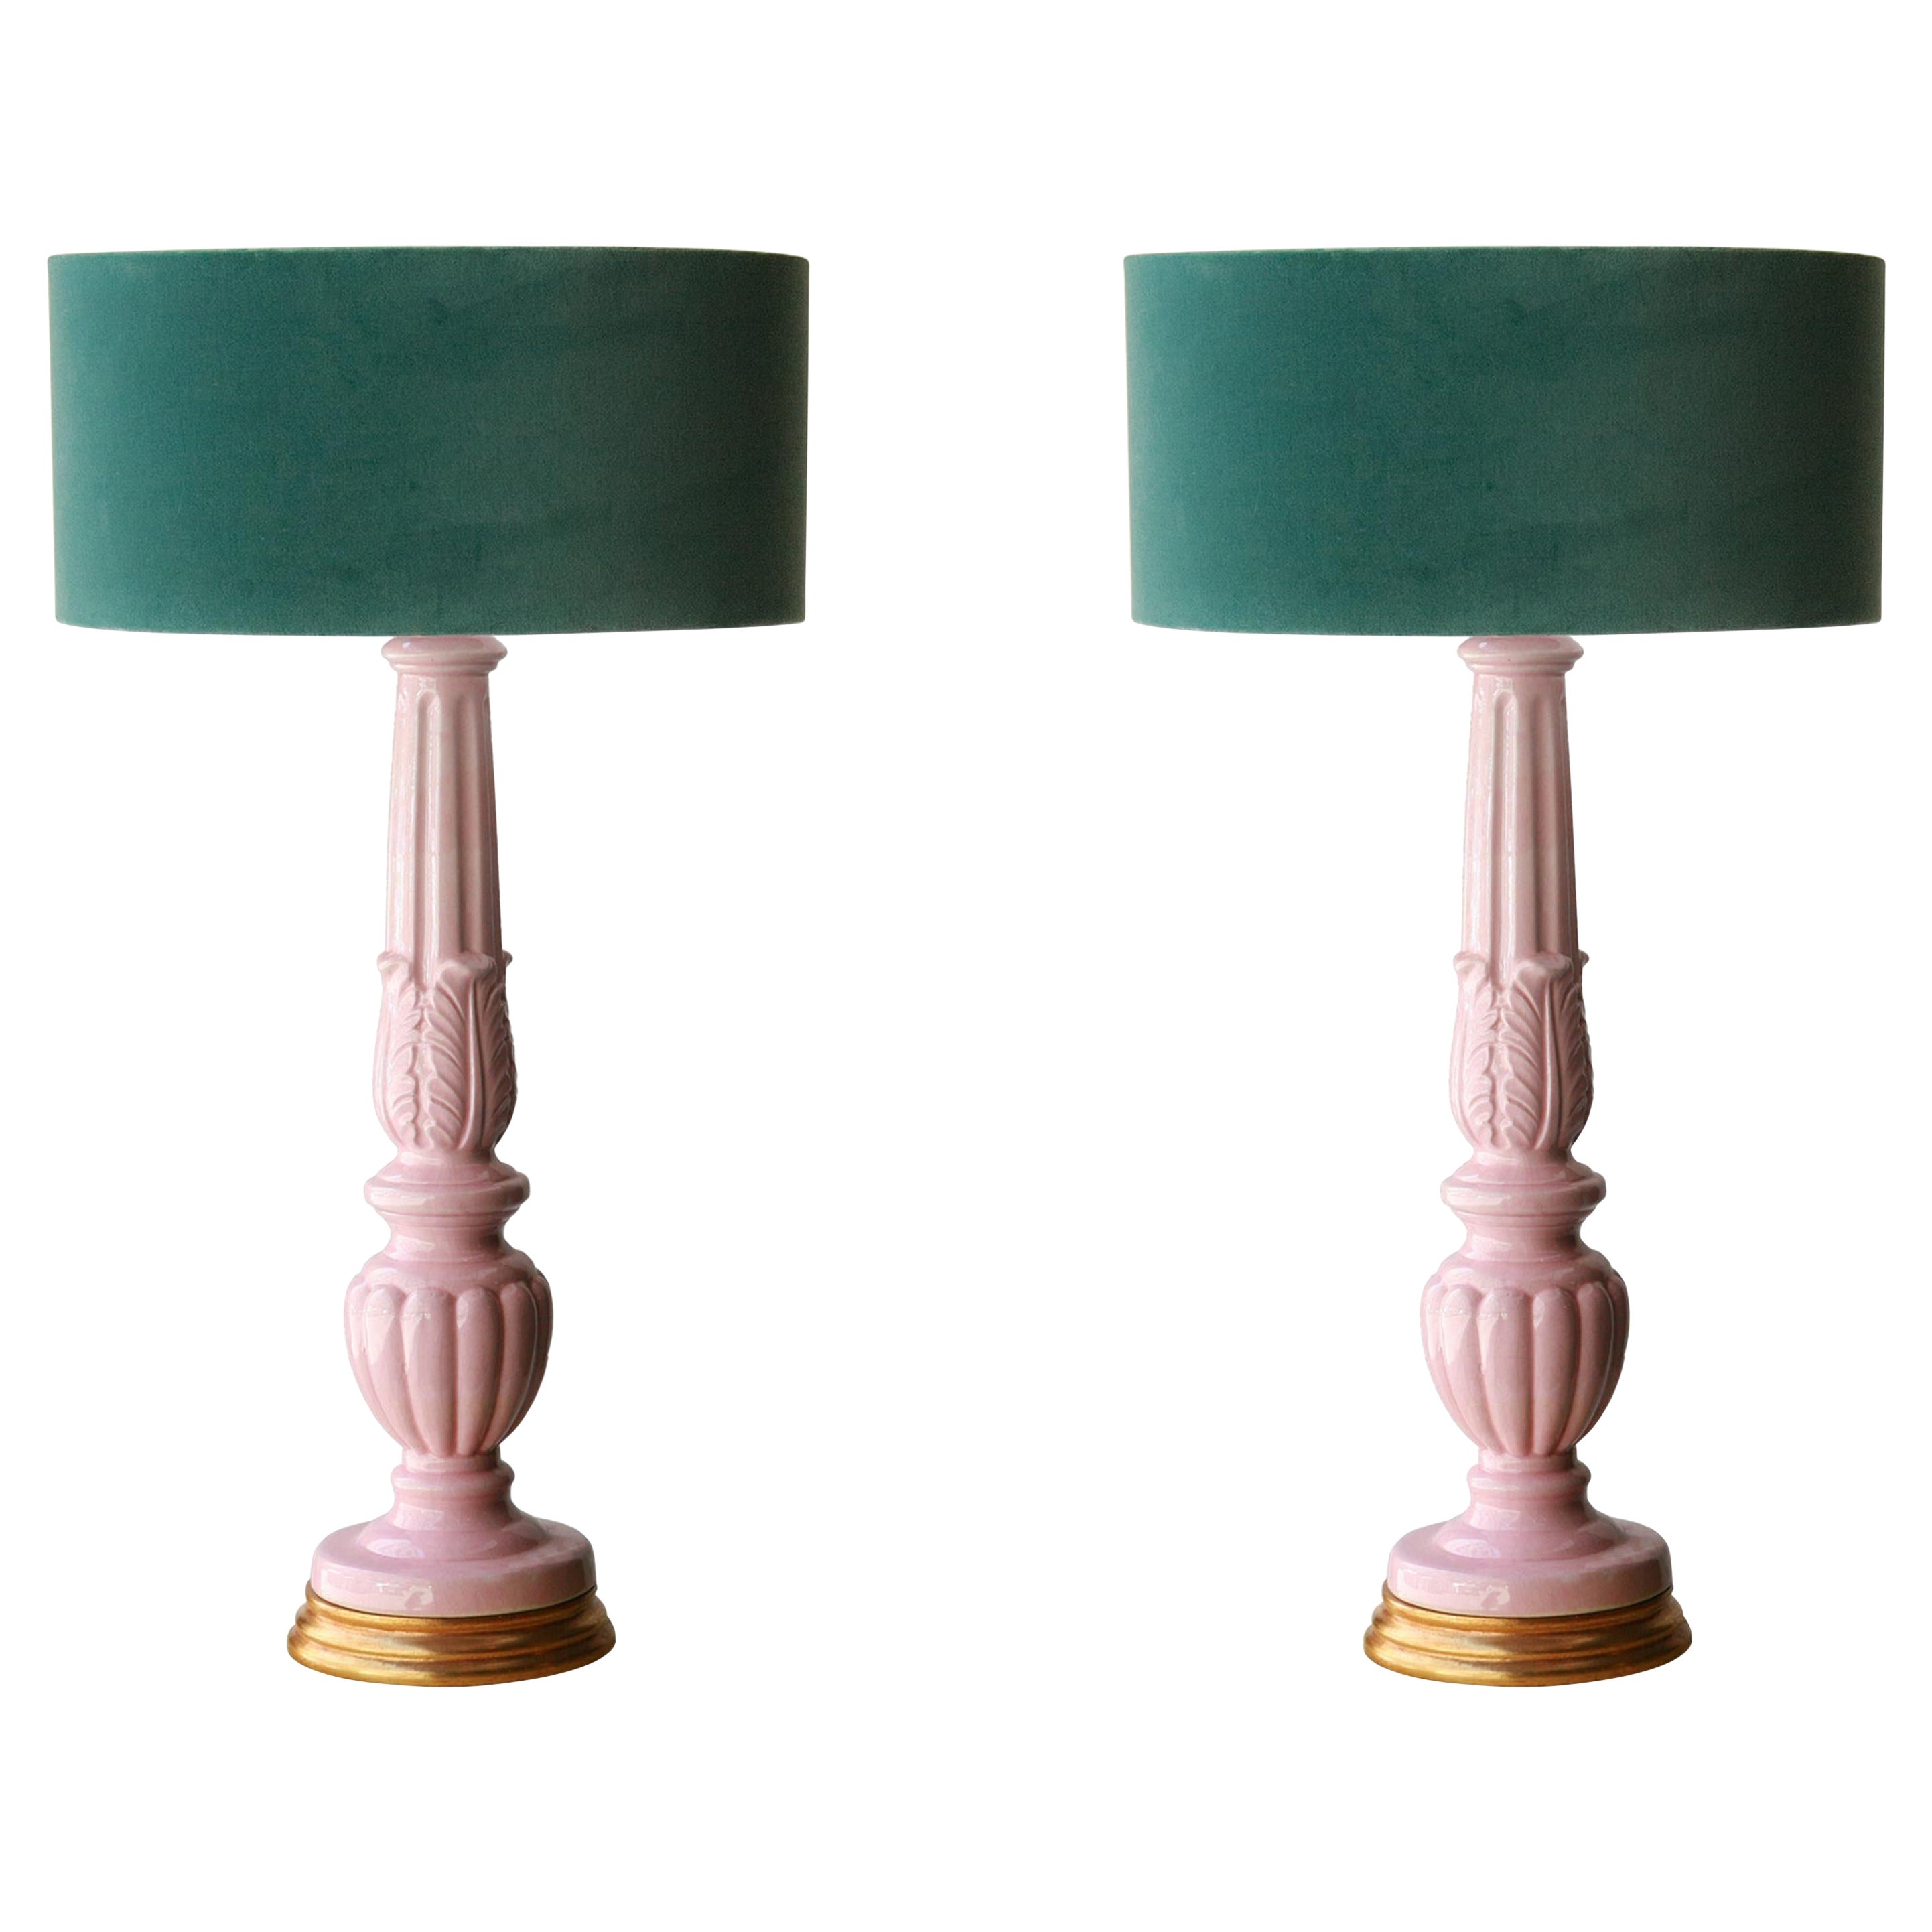 Mid-Century Modern Handcrafted Manises Ceramic Pink Green Pair of Table Lamps For Sale